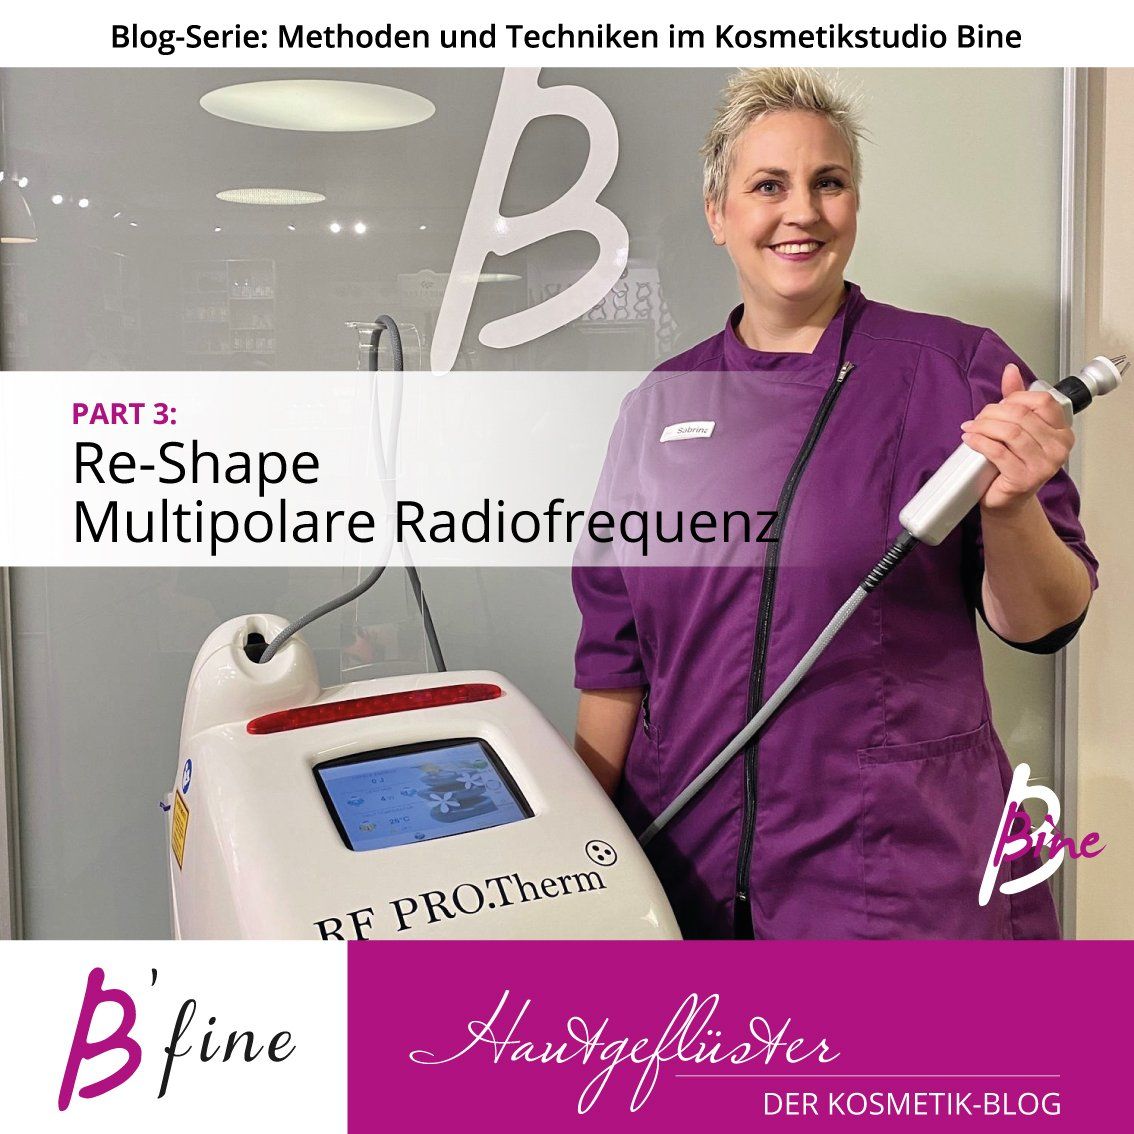 Re-Shape Multipolare Radiofrequenz